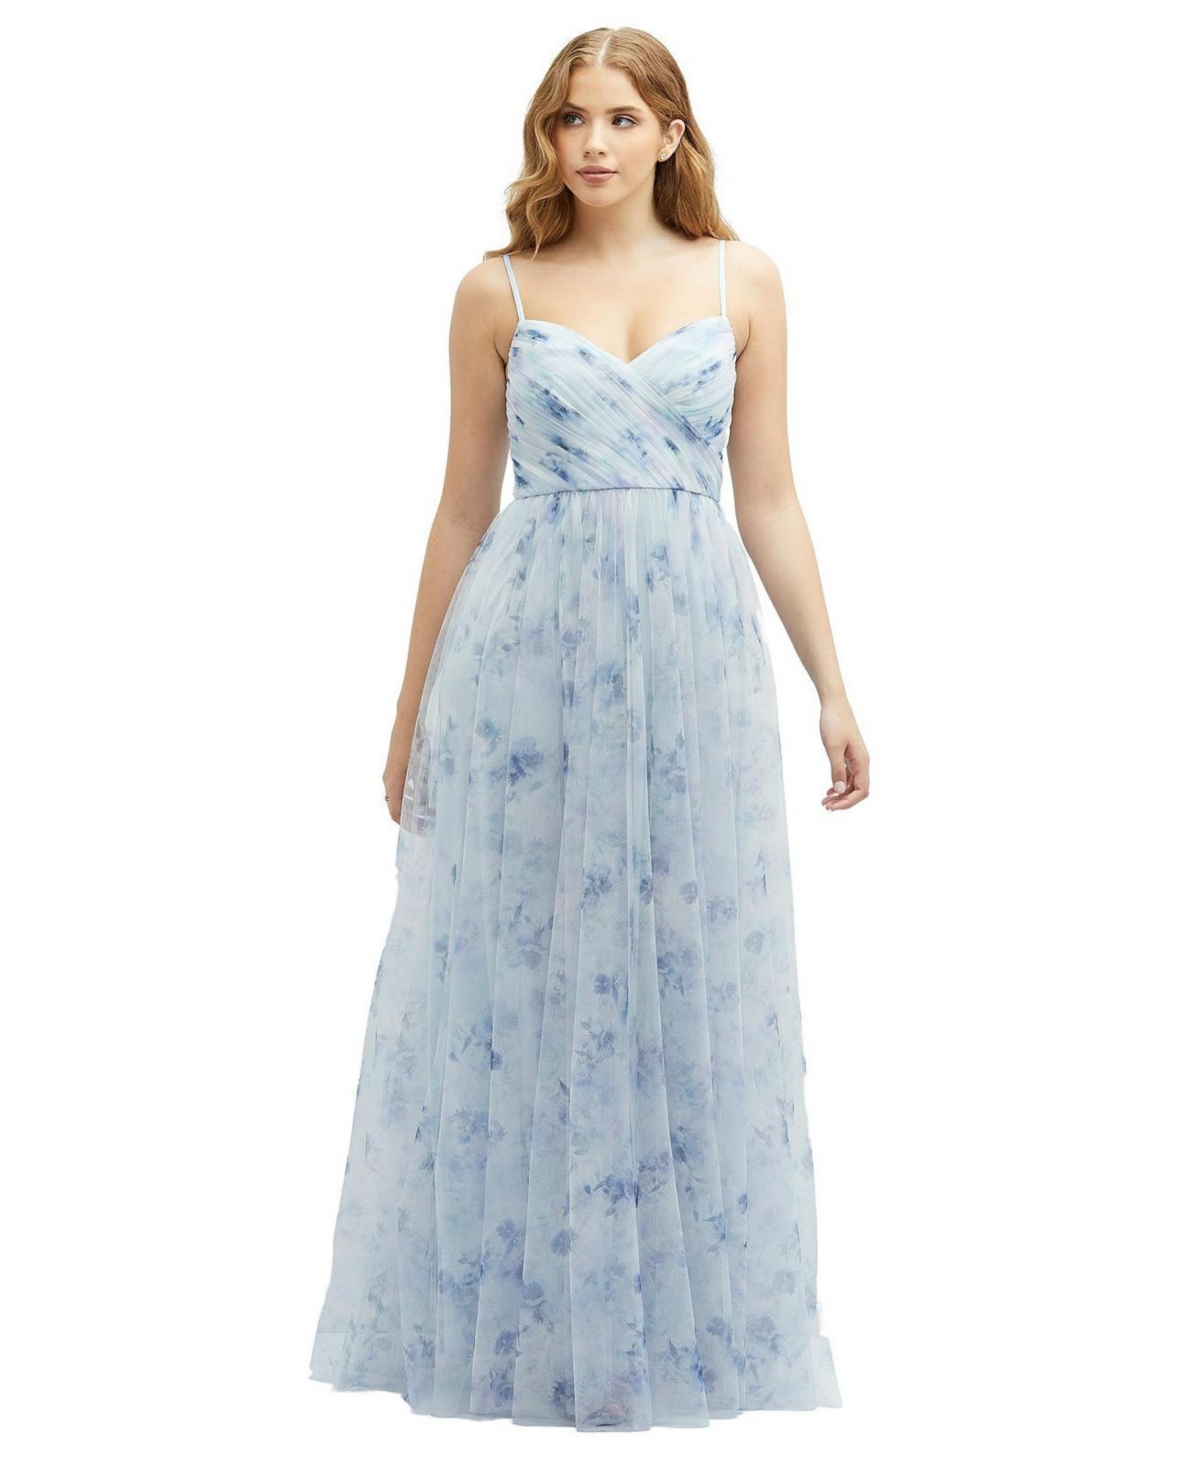 Floral Ruched Wrap Bodice Tulle Dress with Long Full Skirt - Mist garden